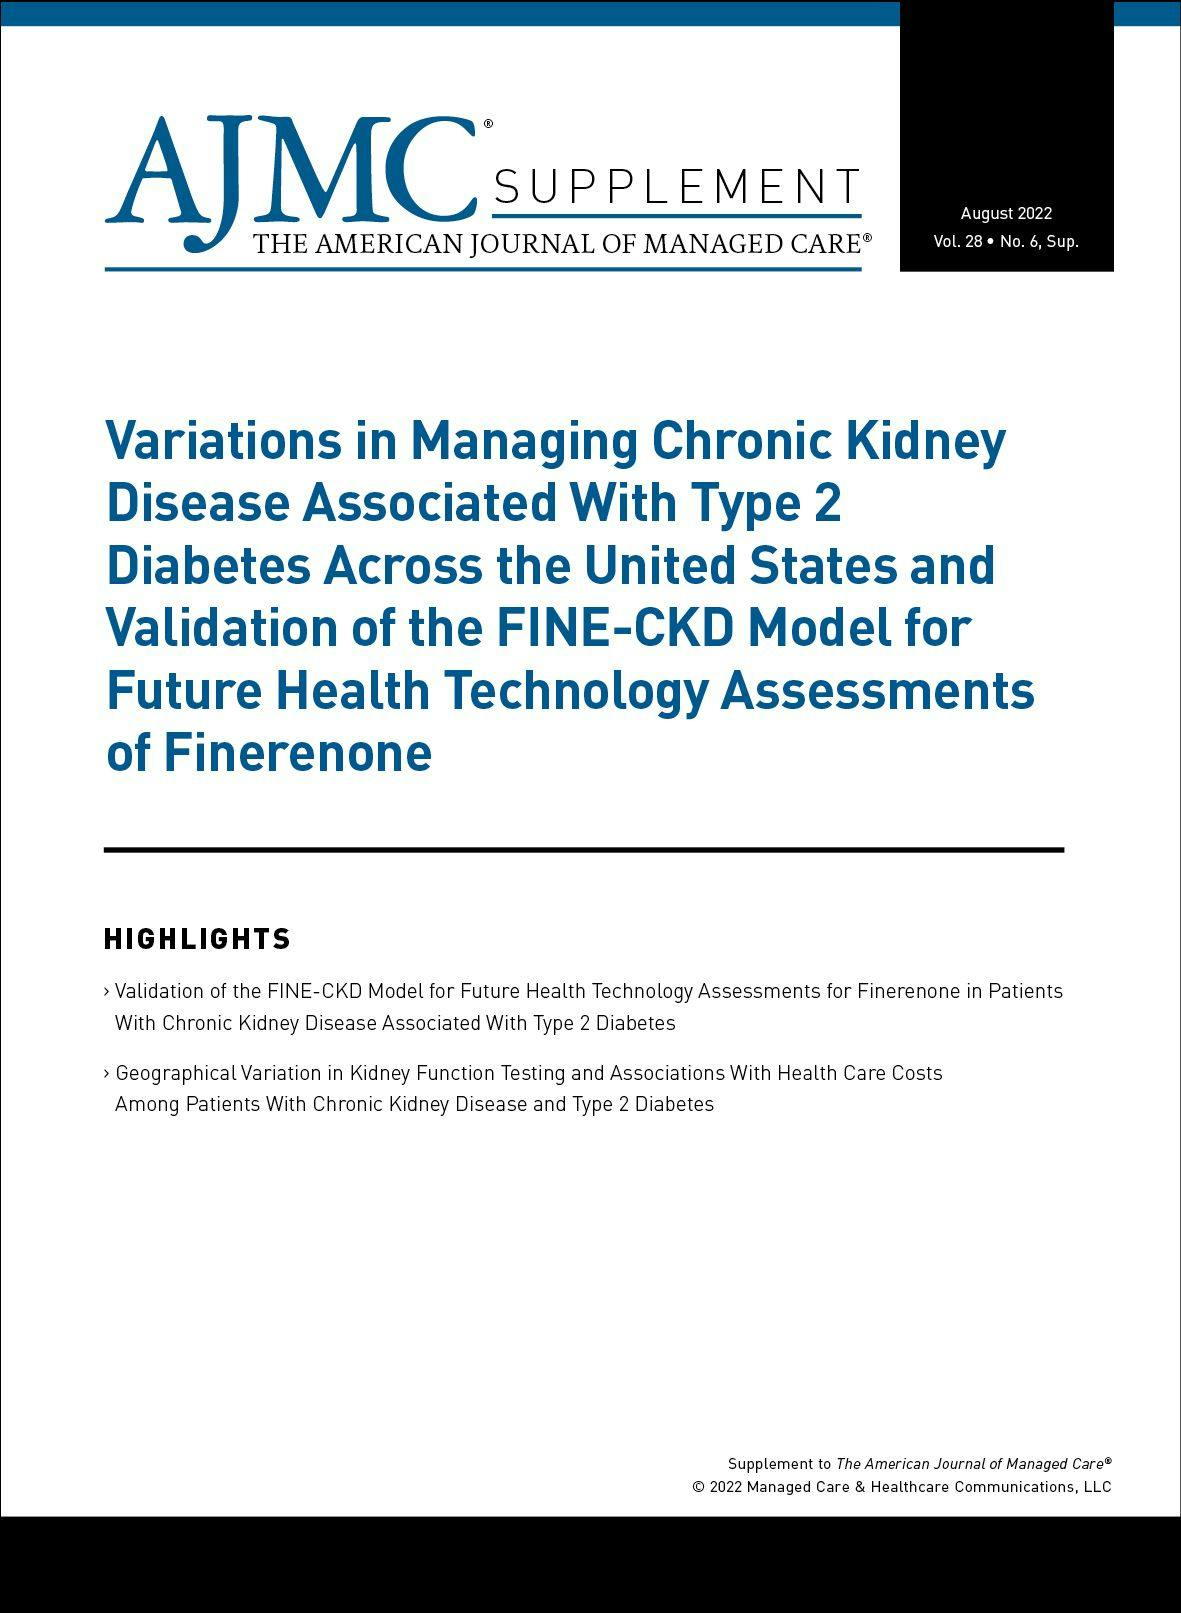 Variations in Managing Chronic Kidney Disease Associated With Type 2 Diabetes Across the United States and Validation of the FINE-CKD Model for Future Health Technology Assessments of Finerenone